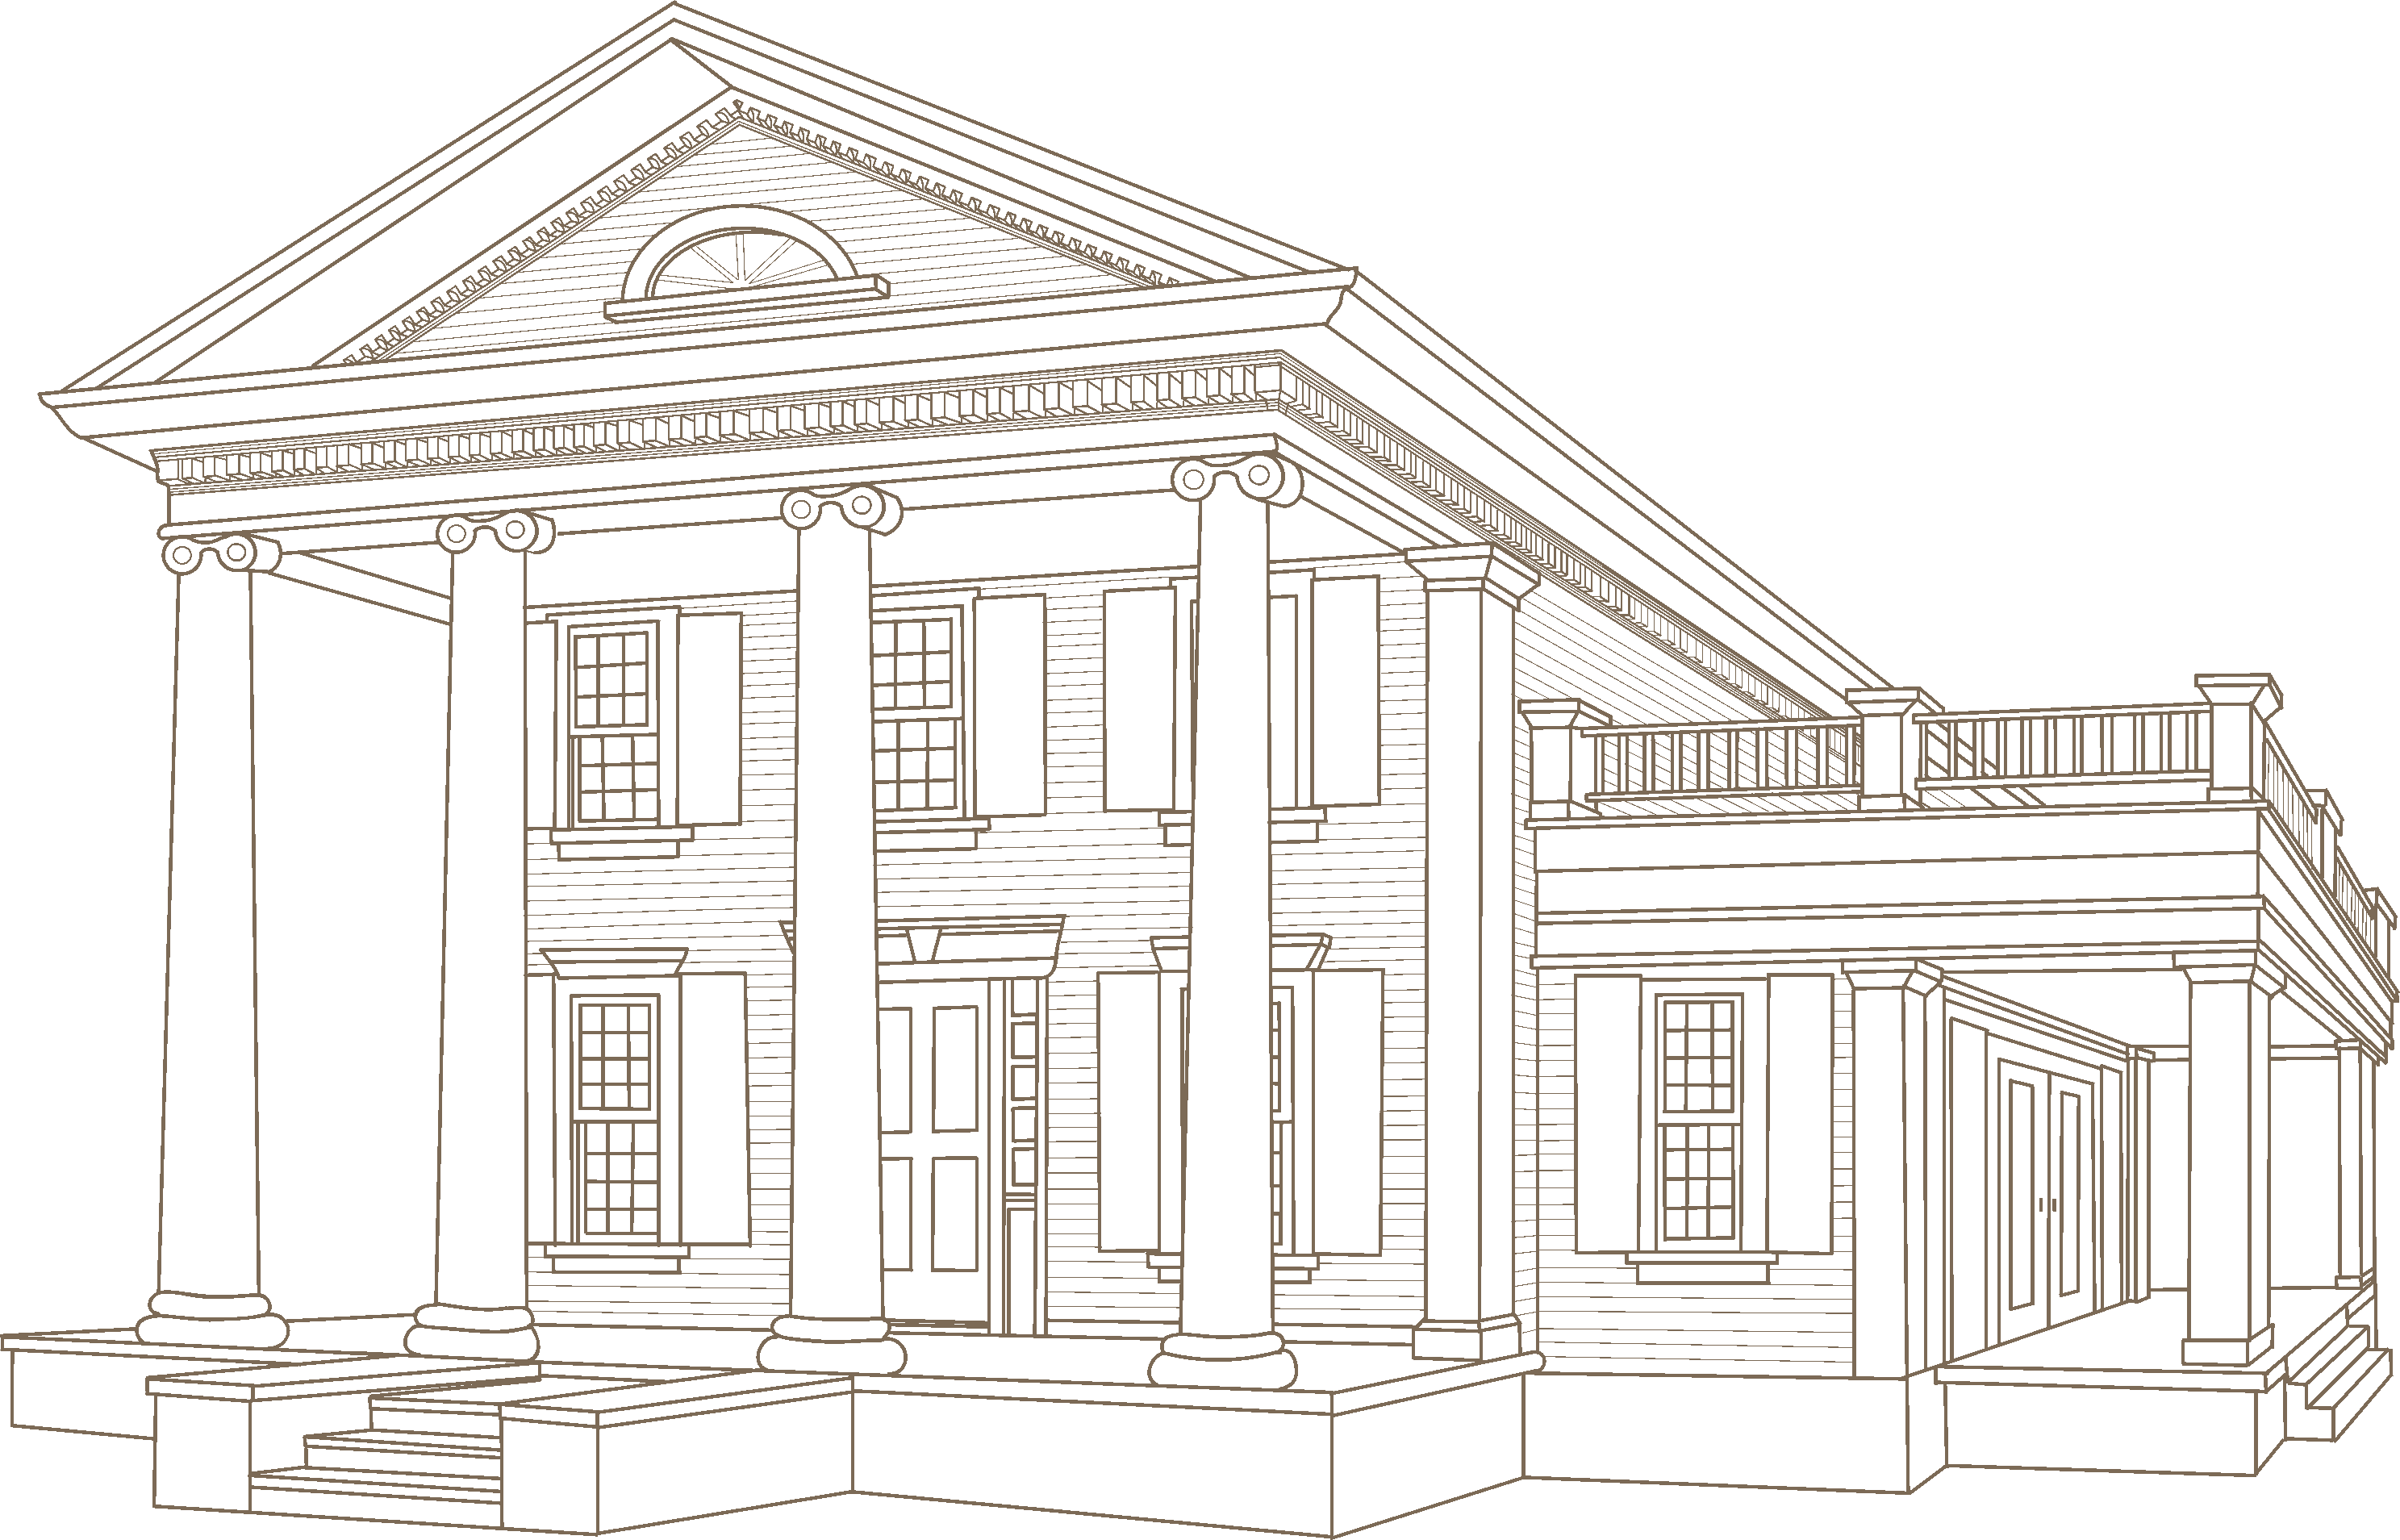 line drawing of a Greek Revival style home